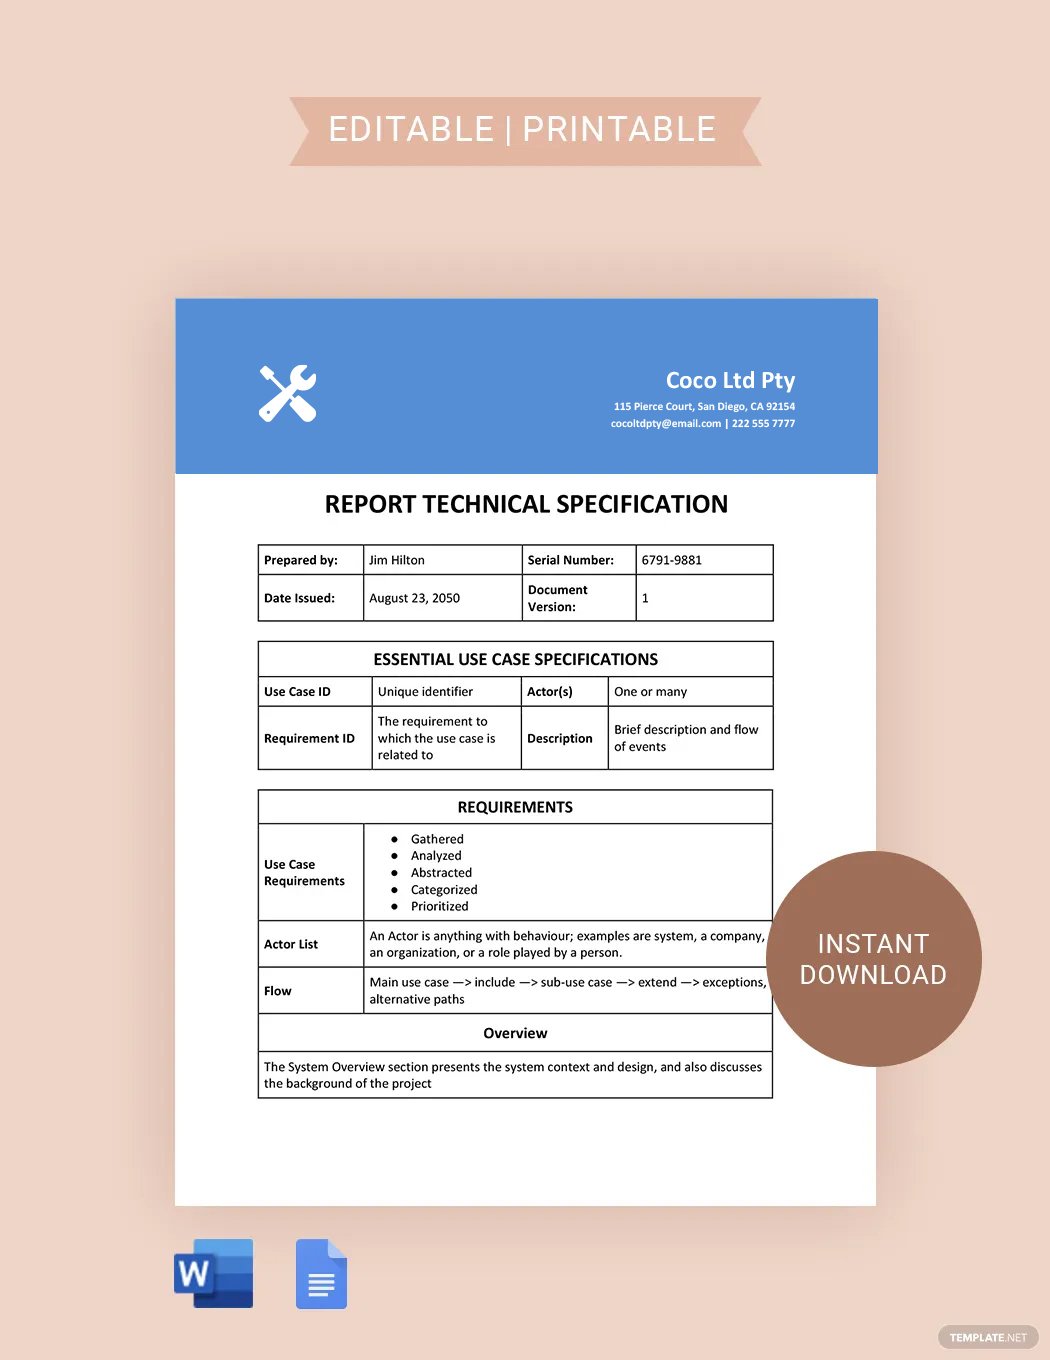 Free Report Technical Specification Template Download in Word, Google